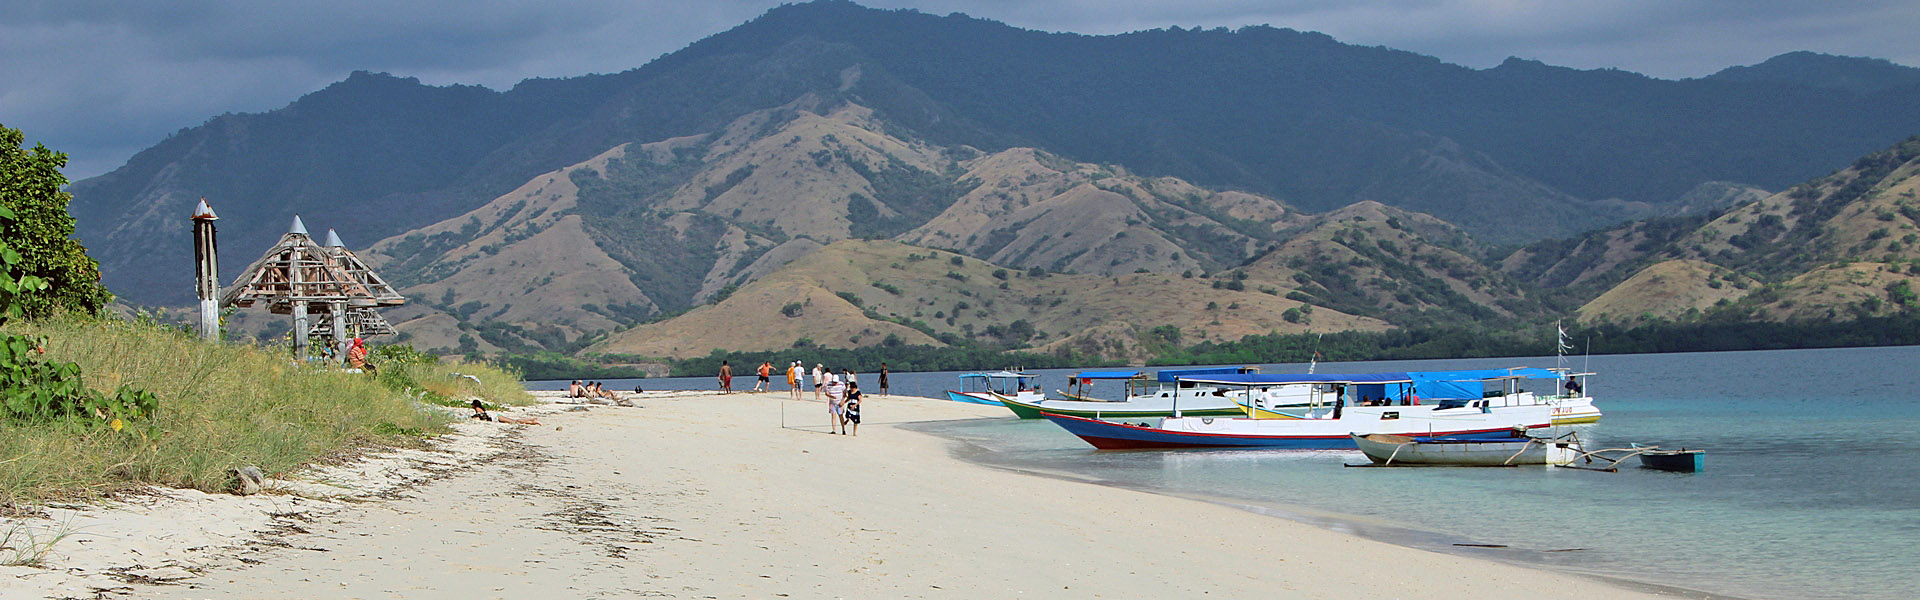 Riung 17 Islands Marine Park off the north cost of Flores, Indonesia